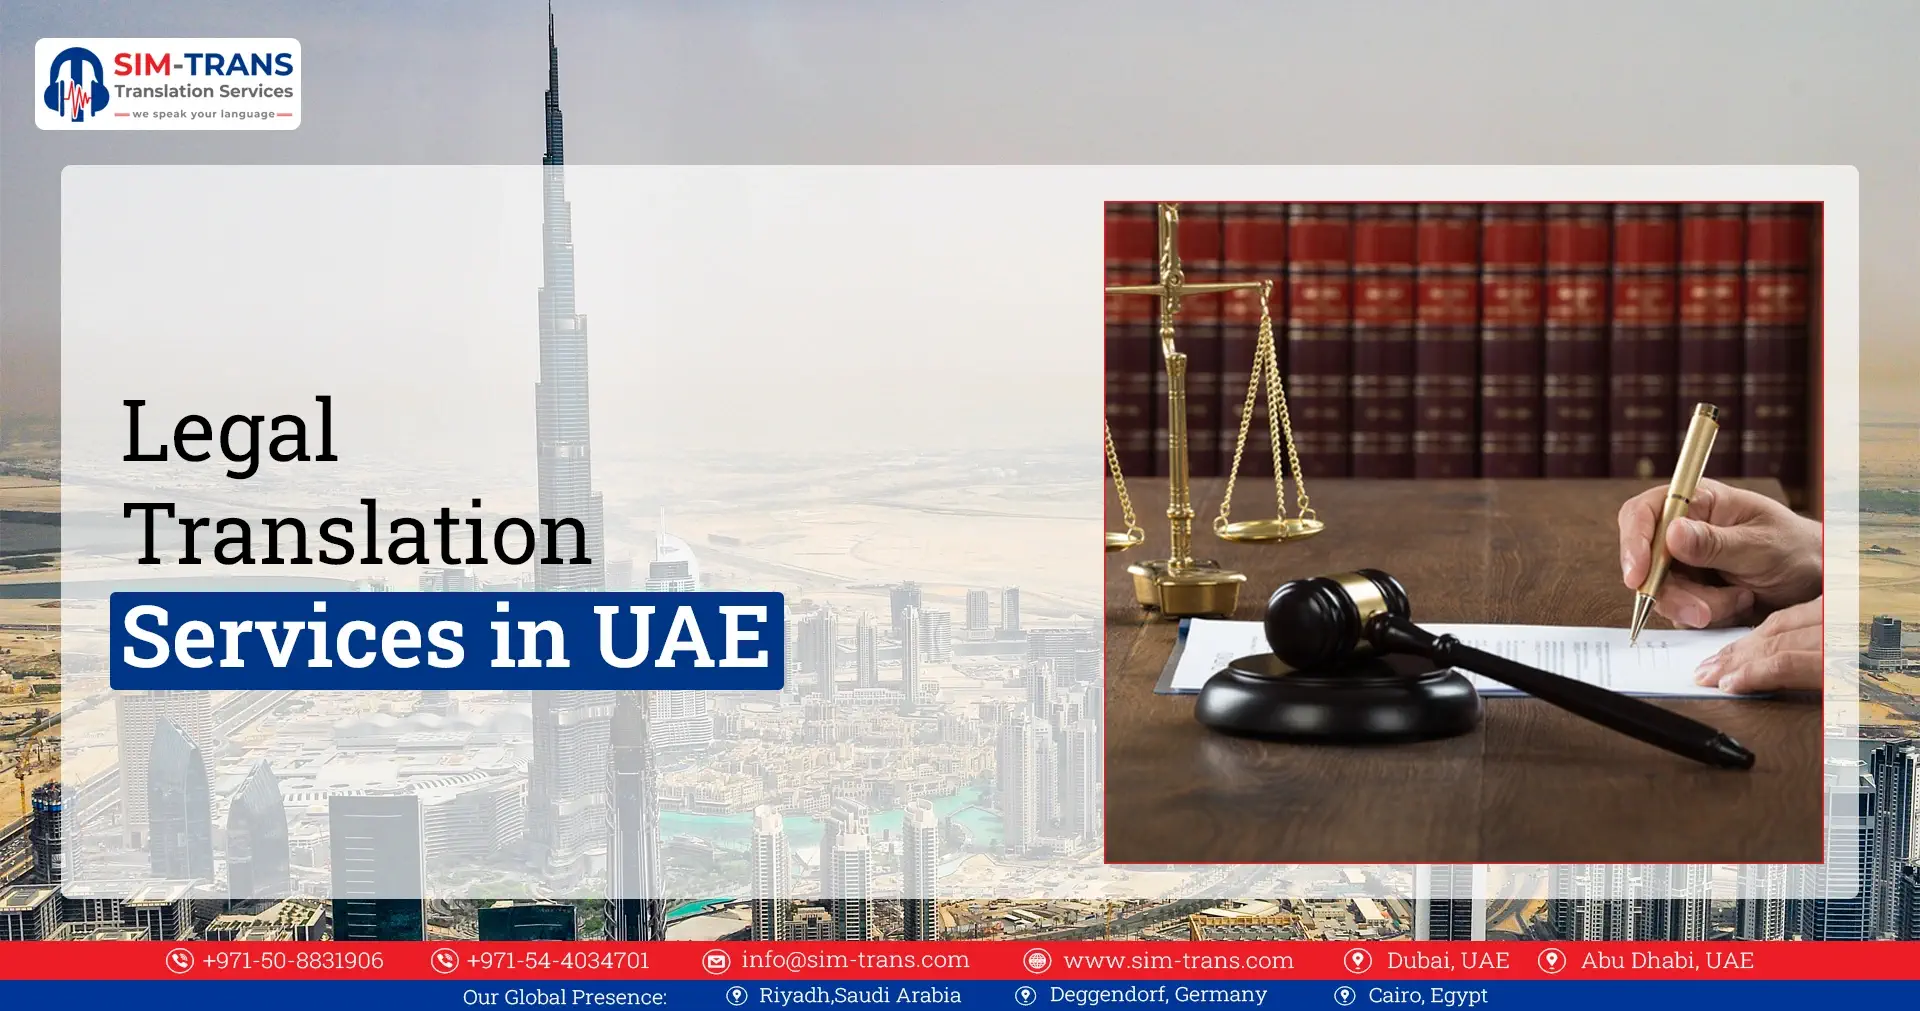 Why Do Law Firms Trust Sim-trans for Legal Translation in the UAE?